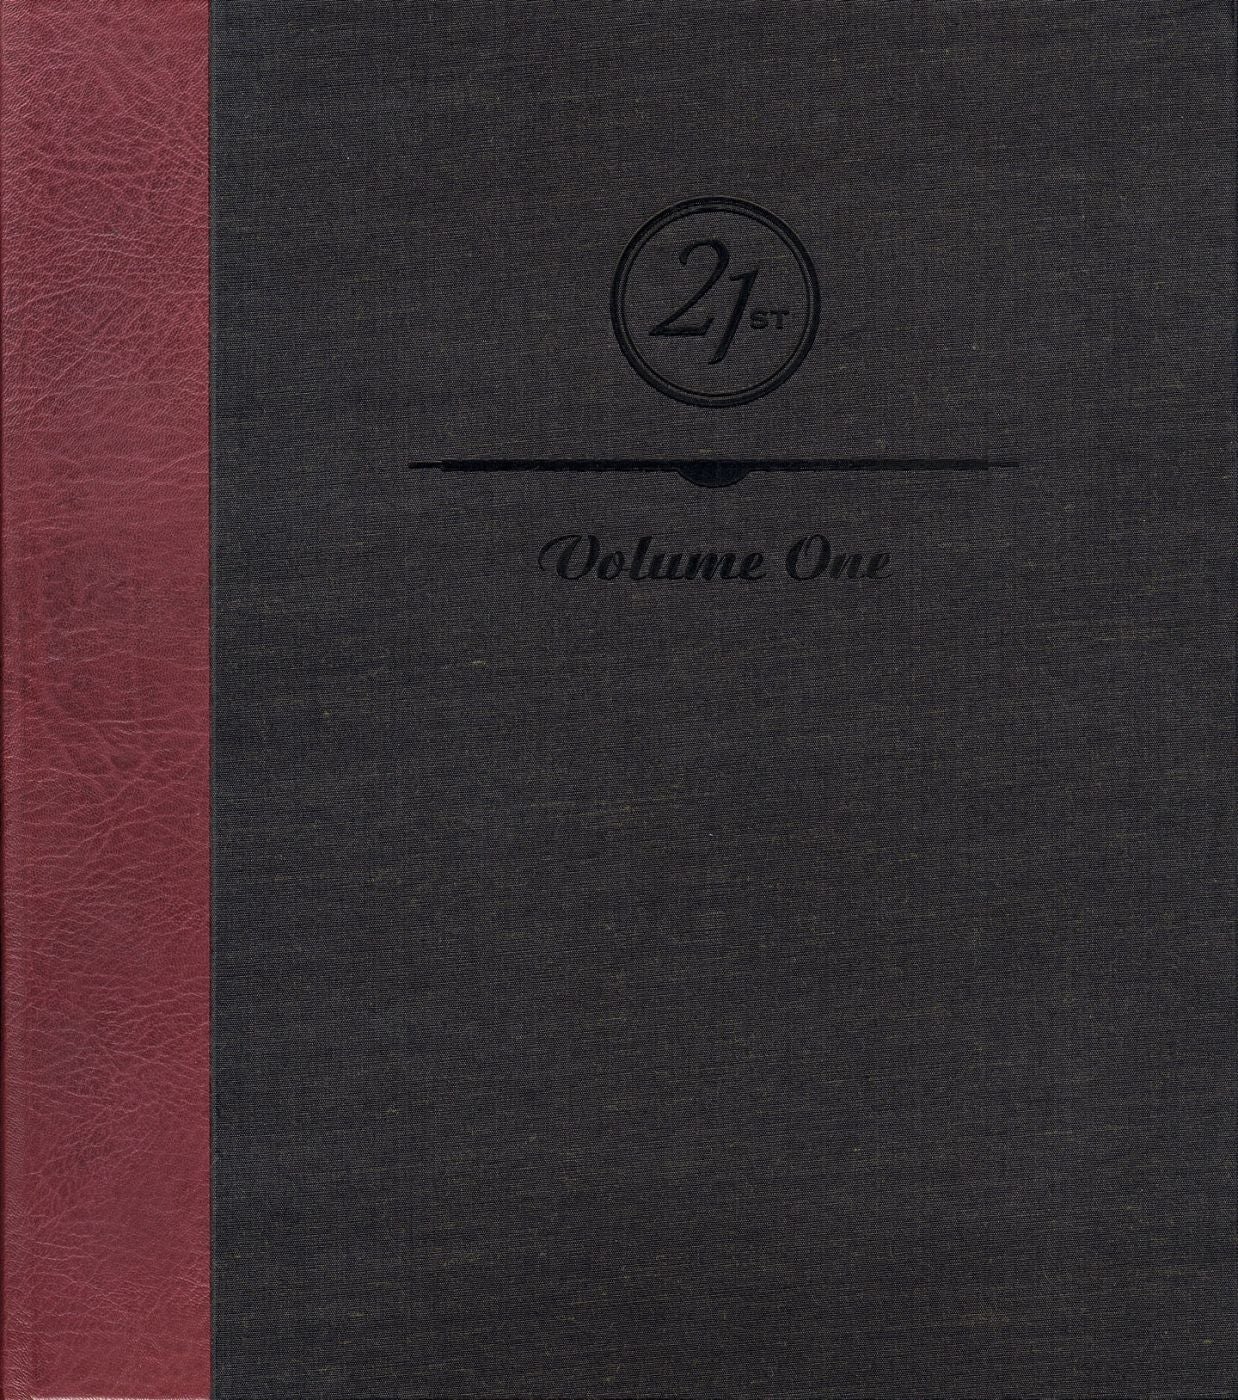 21st Editions Journal of Contemporary Photography Volume 1 (One/I), Deluxe Limited Edition